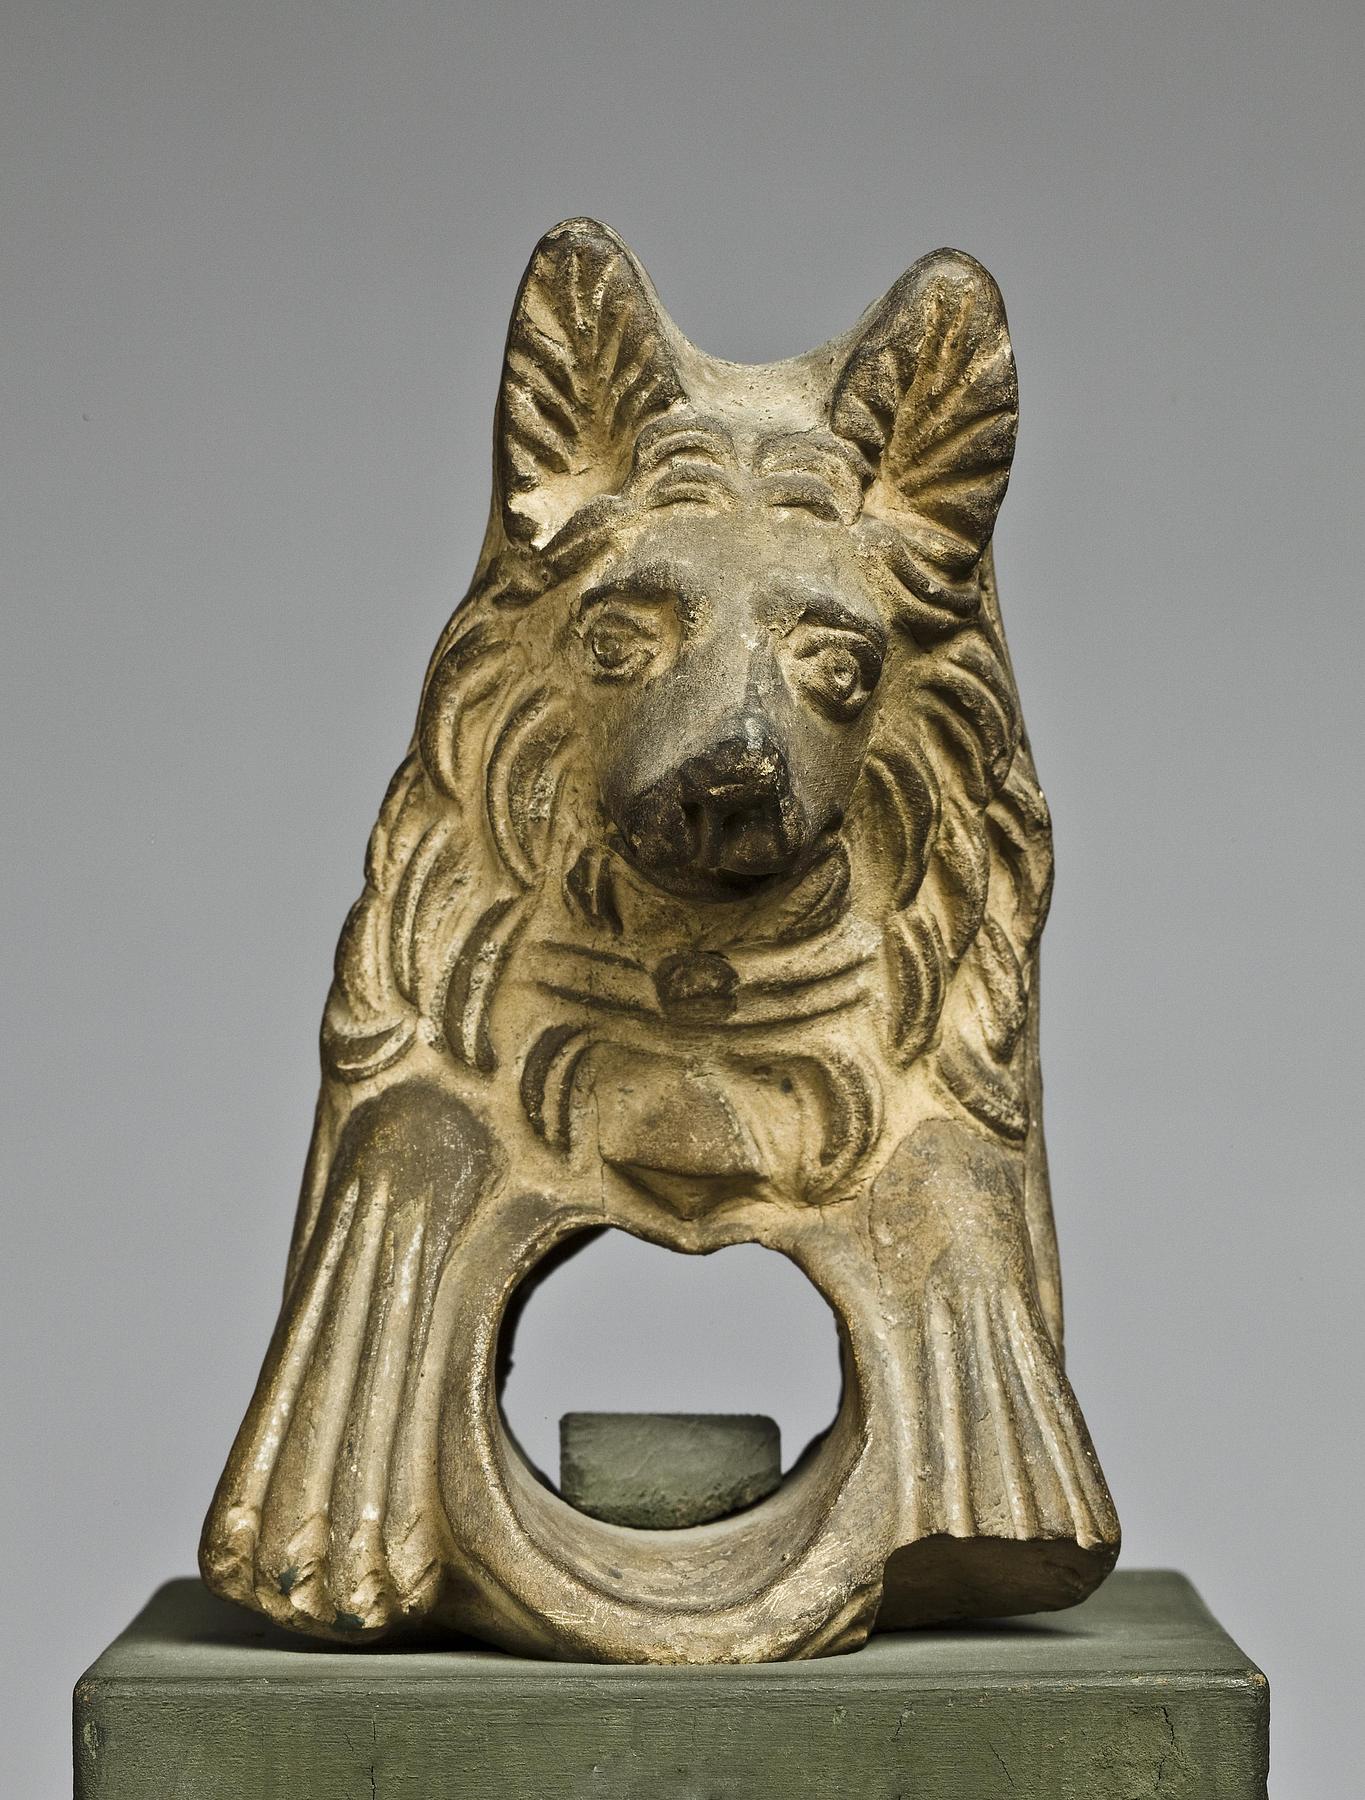 Water spout in the shape of a dog, H1056